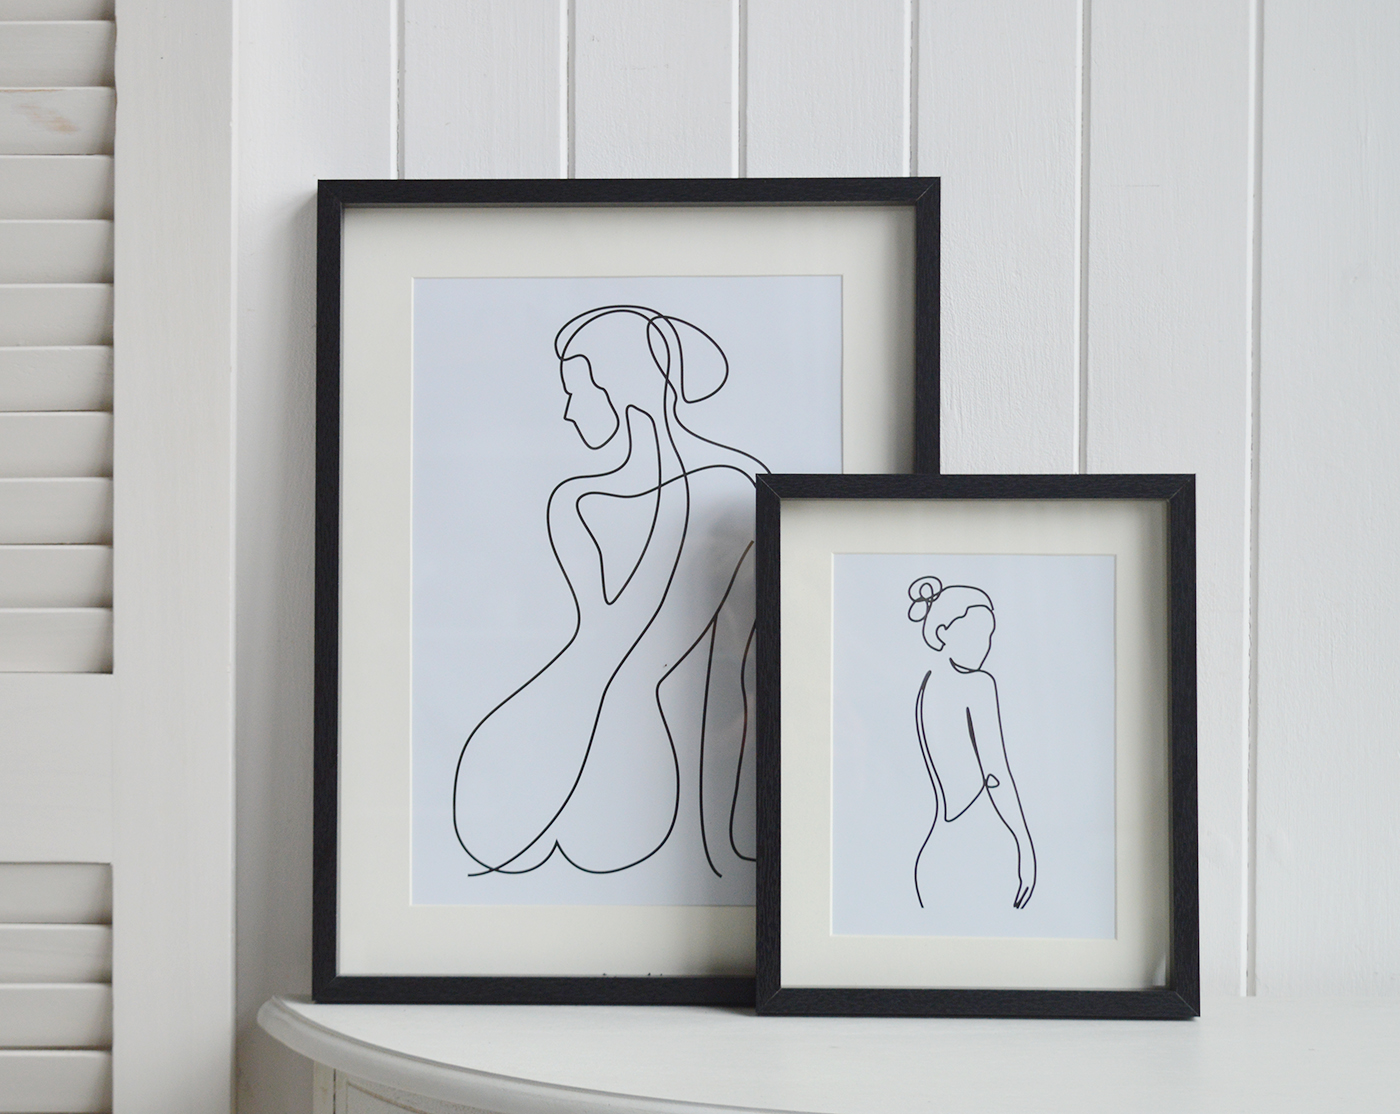 New England Wall Art Decor.  Lady Silhouette. Two differing prints in 2 sizes perfect for styling a console table in a modern farmhouse or Hamptons coastal styled home